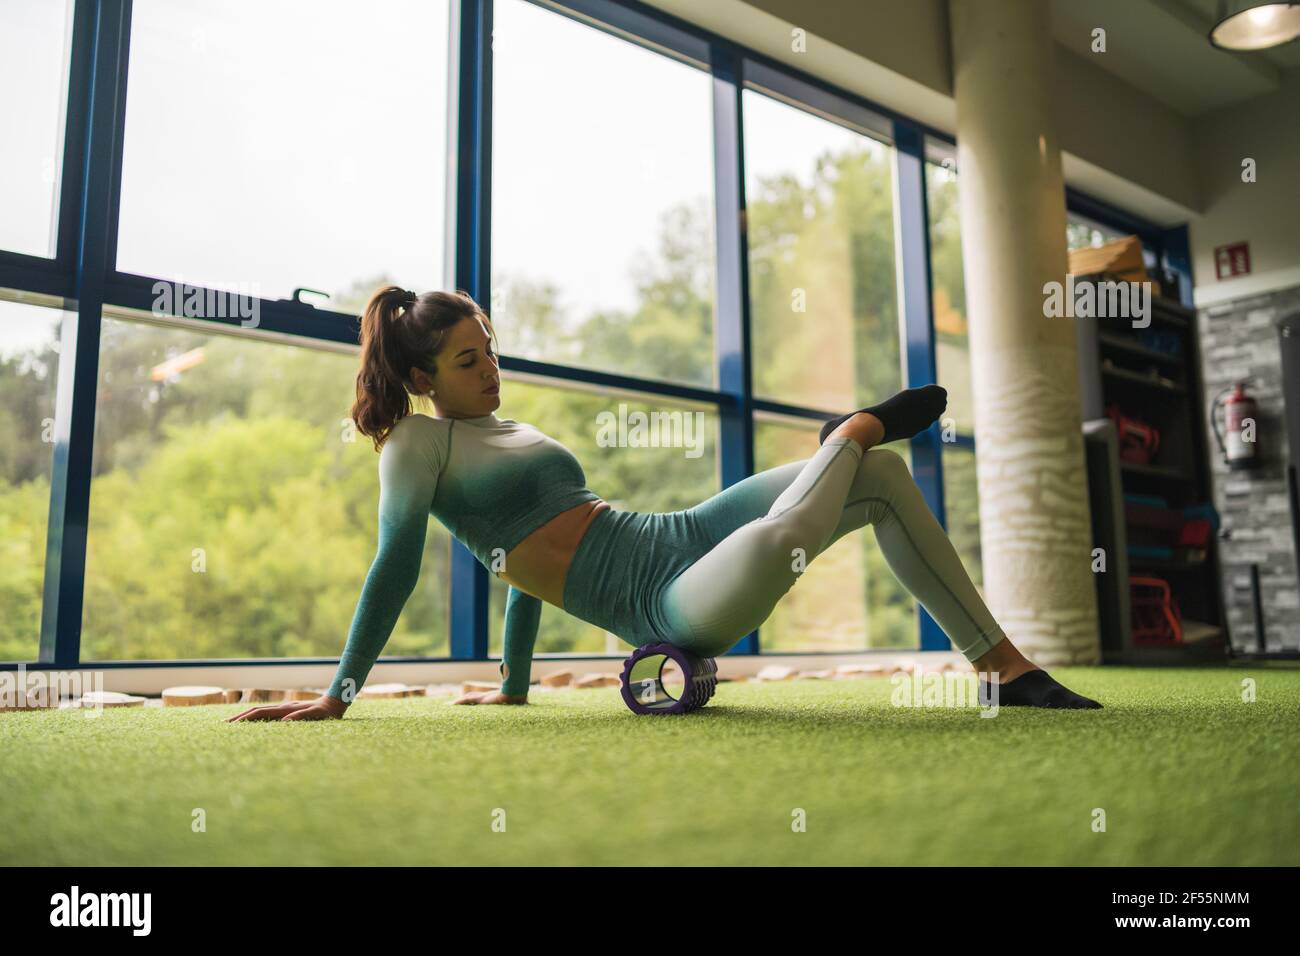 Female athlete exercising with foam roller at health club Stock Photo